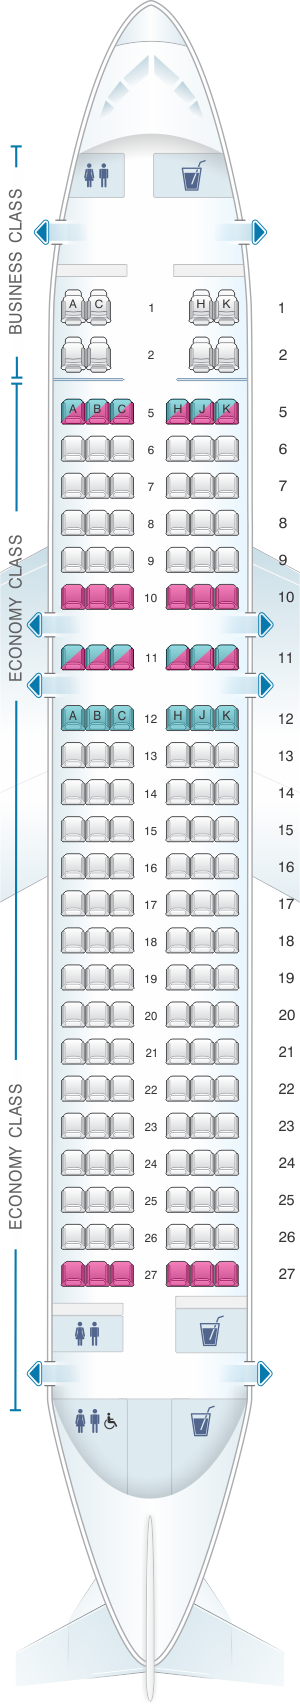 Seat Map ANA - All Nippon Airways Airbus A320 neo | SeatMaestro